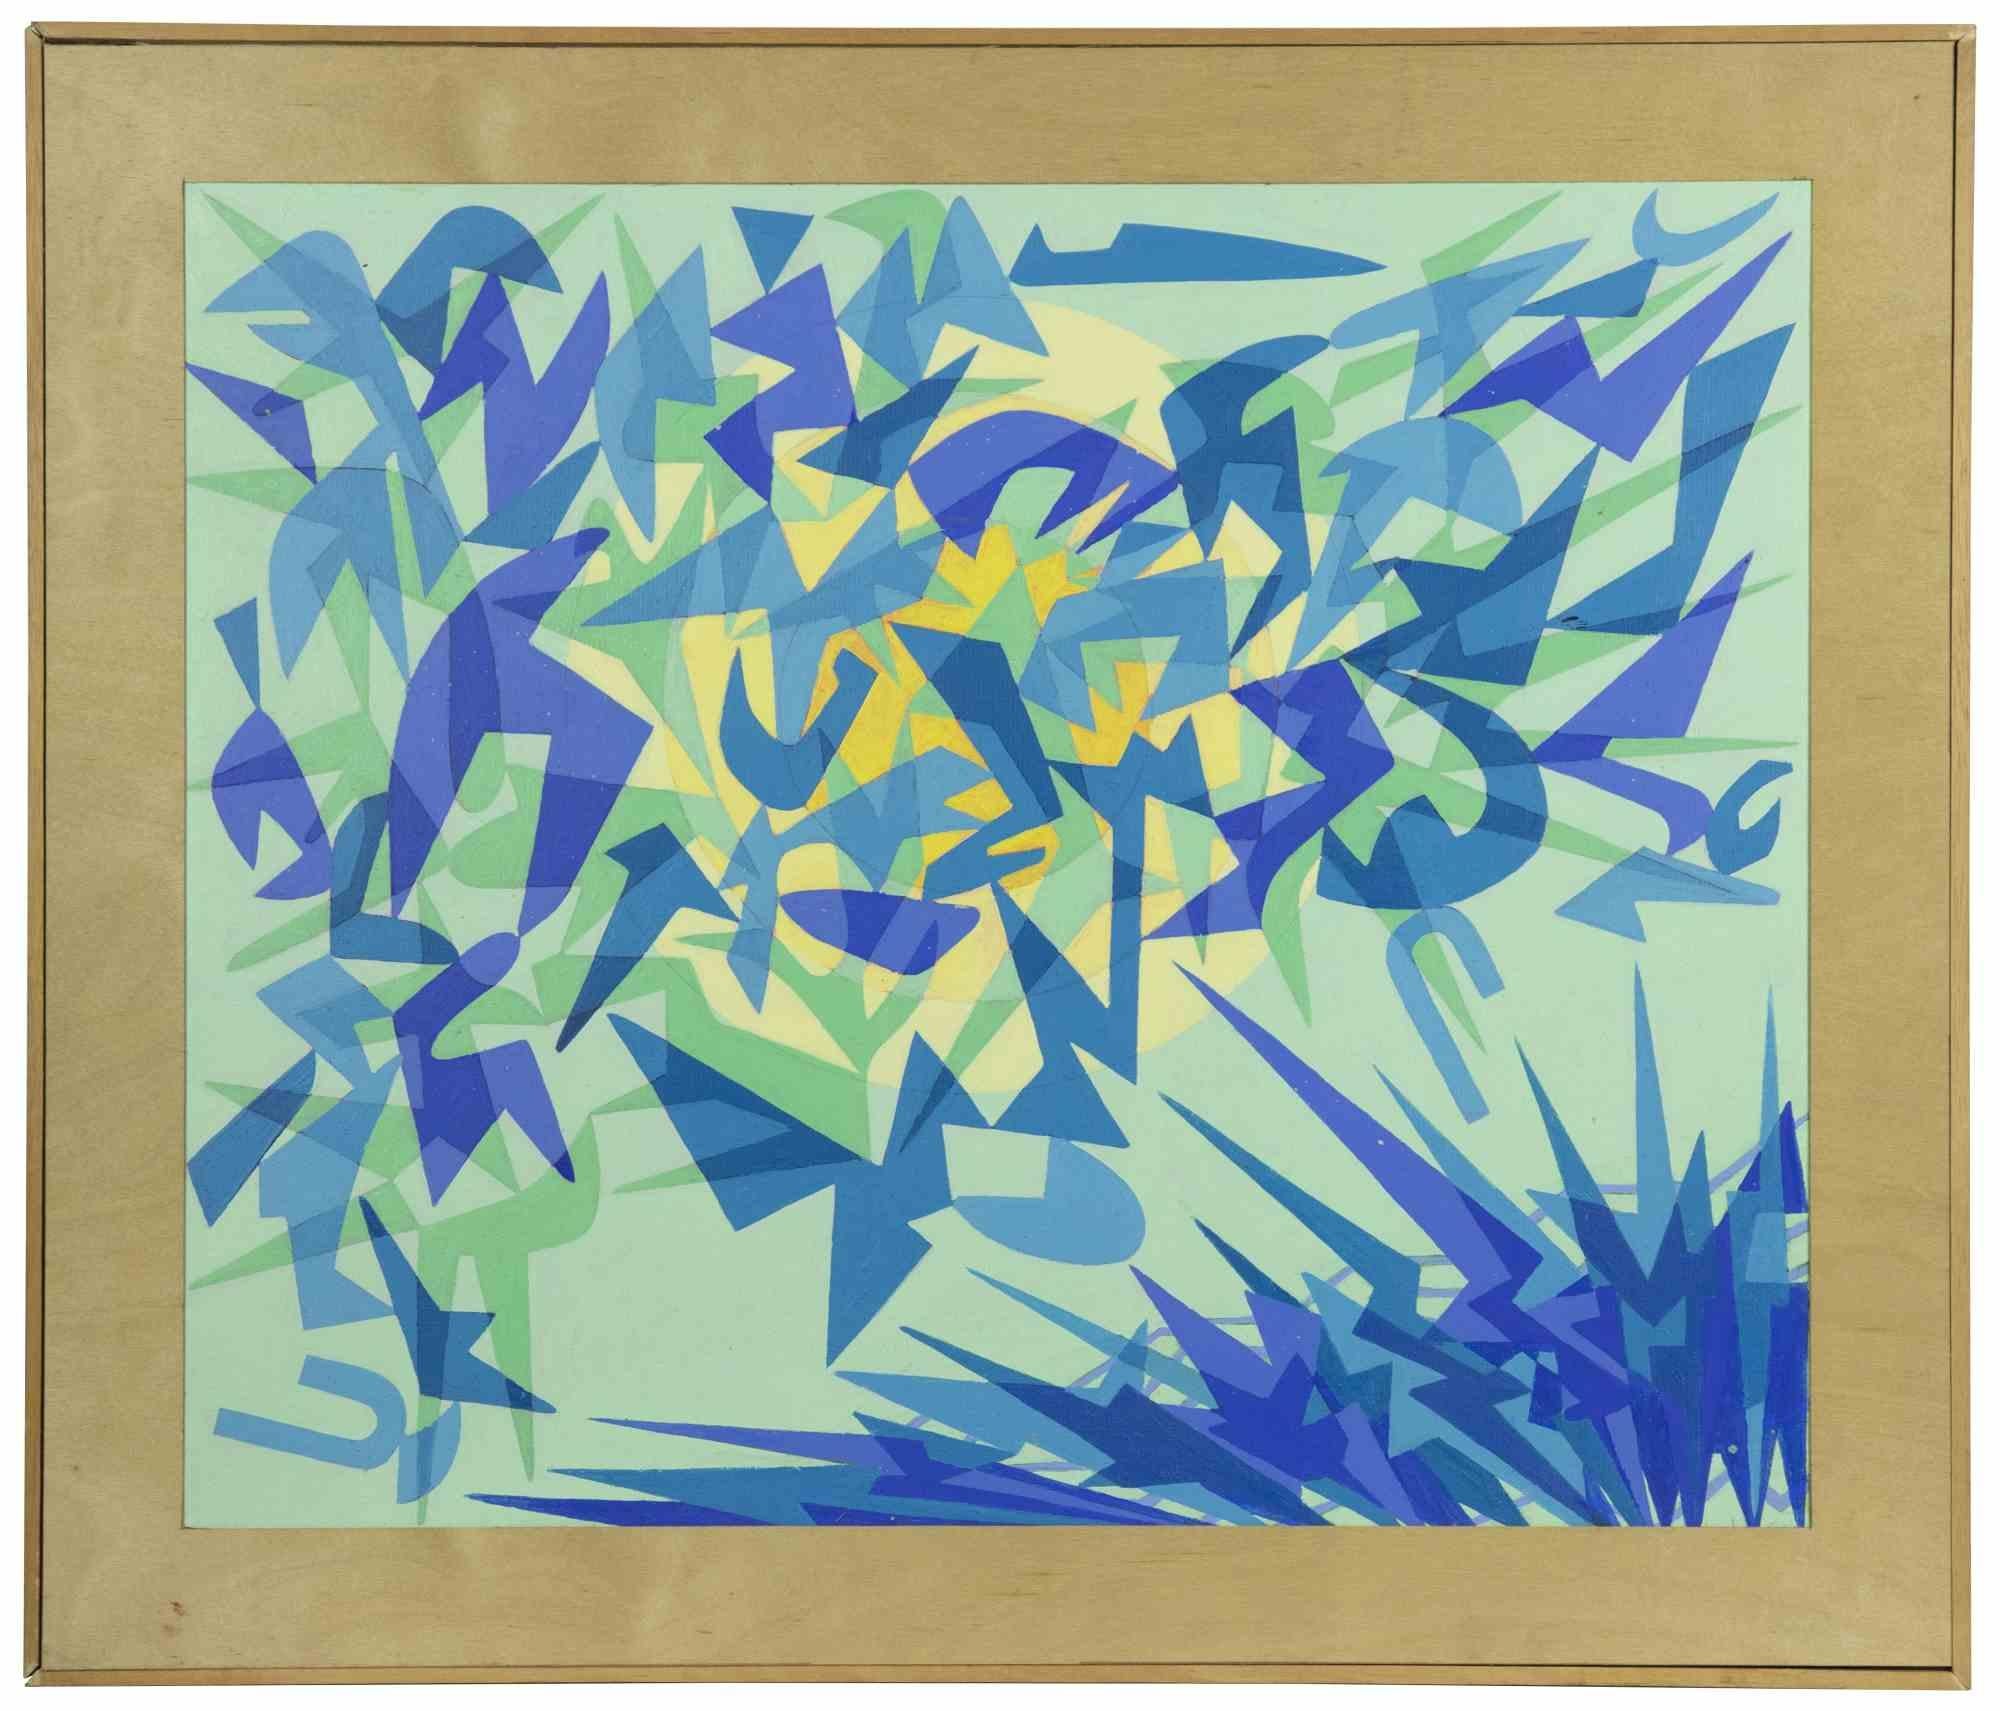 Blue Explosion - Painting by Leo Guida - 1970s